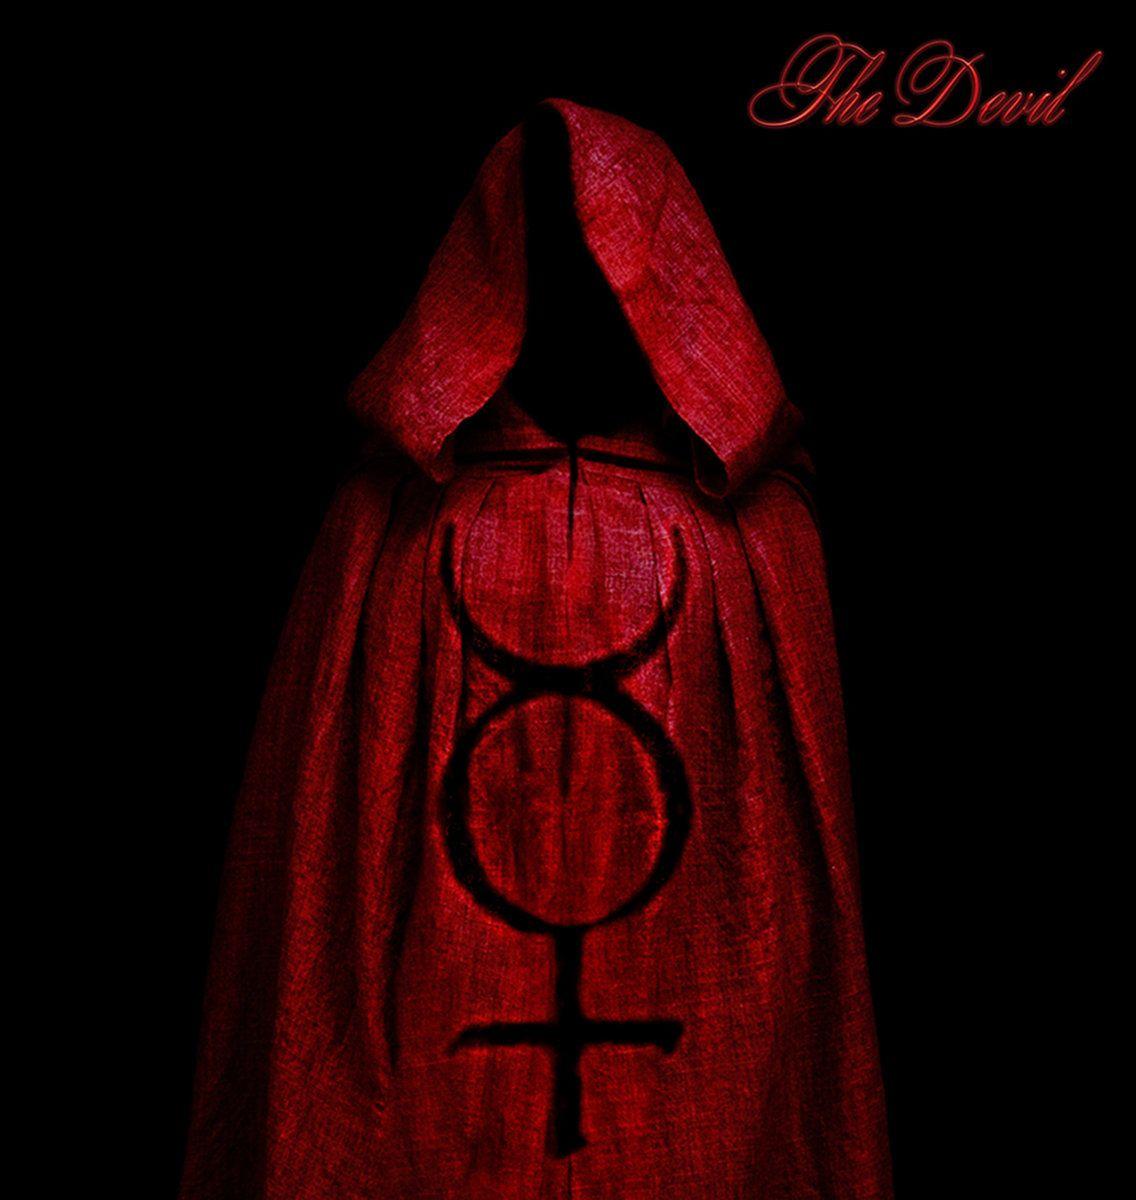 The Devil. Candlelight Records UK